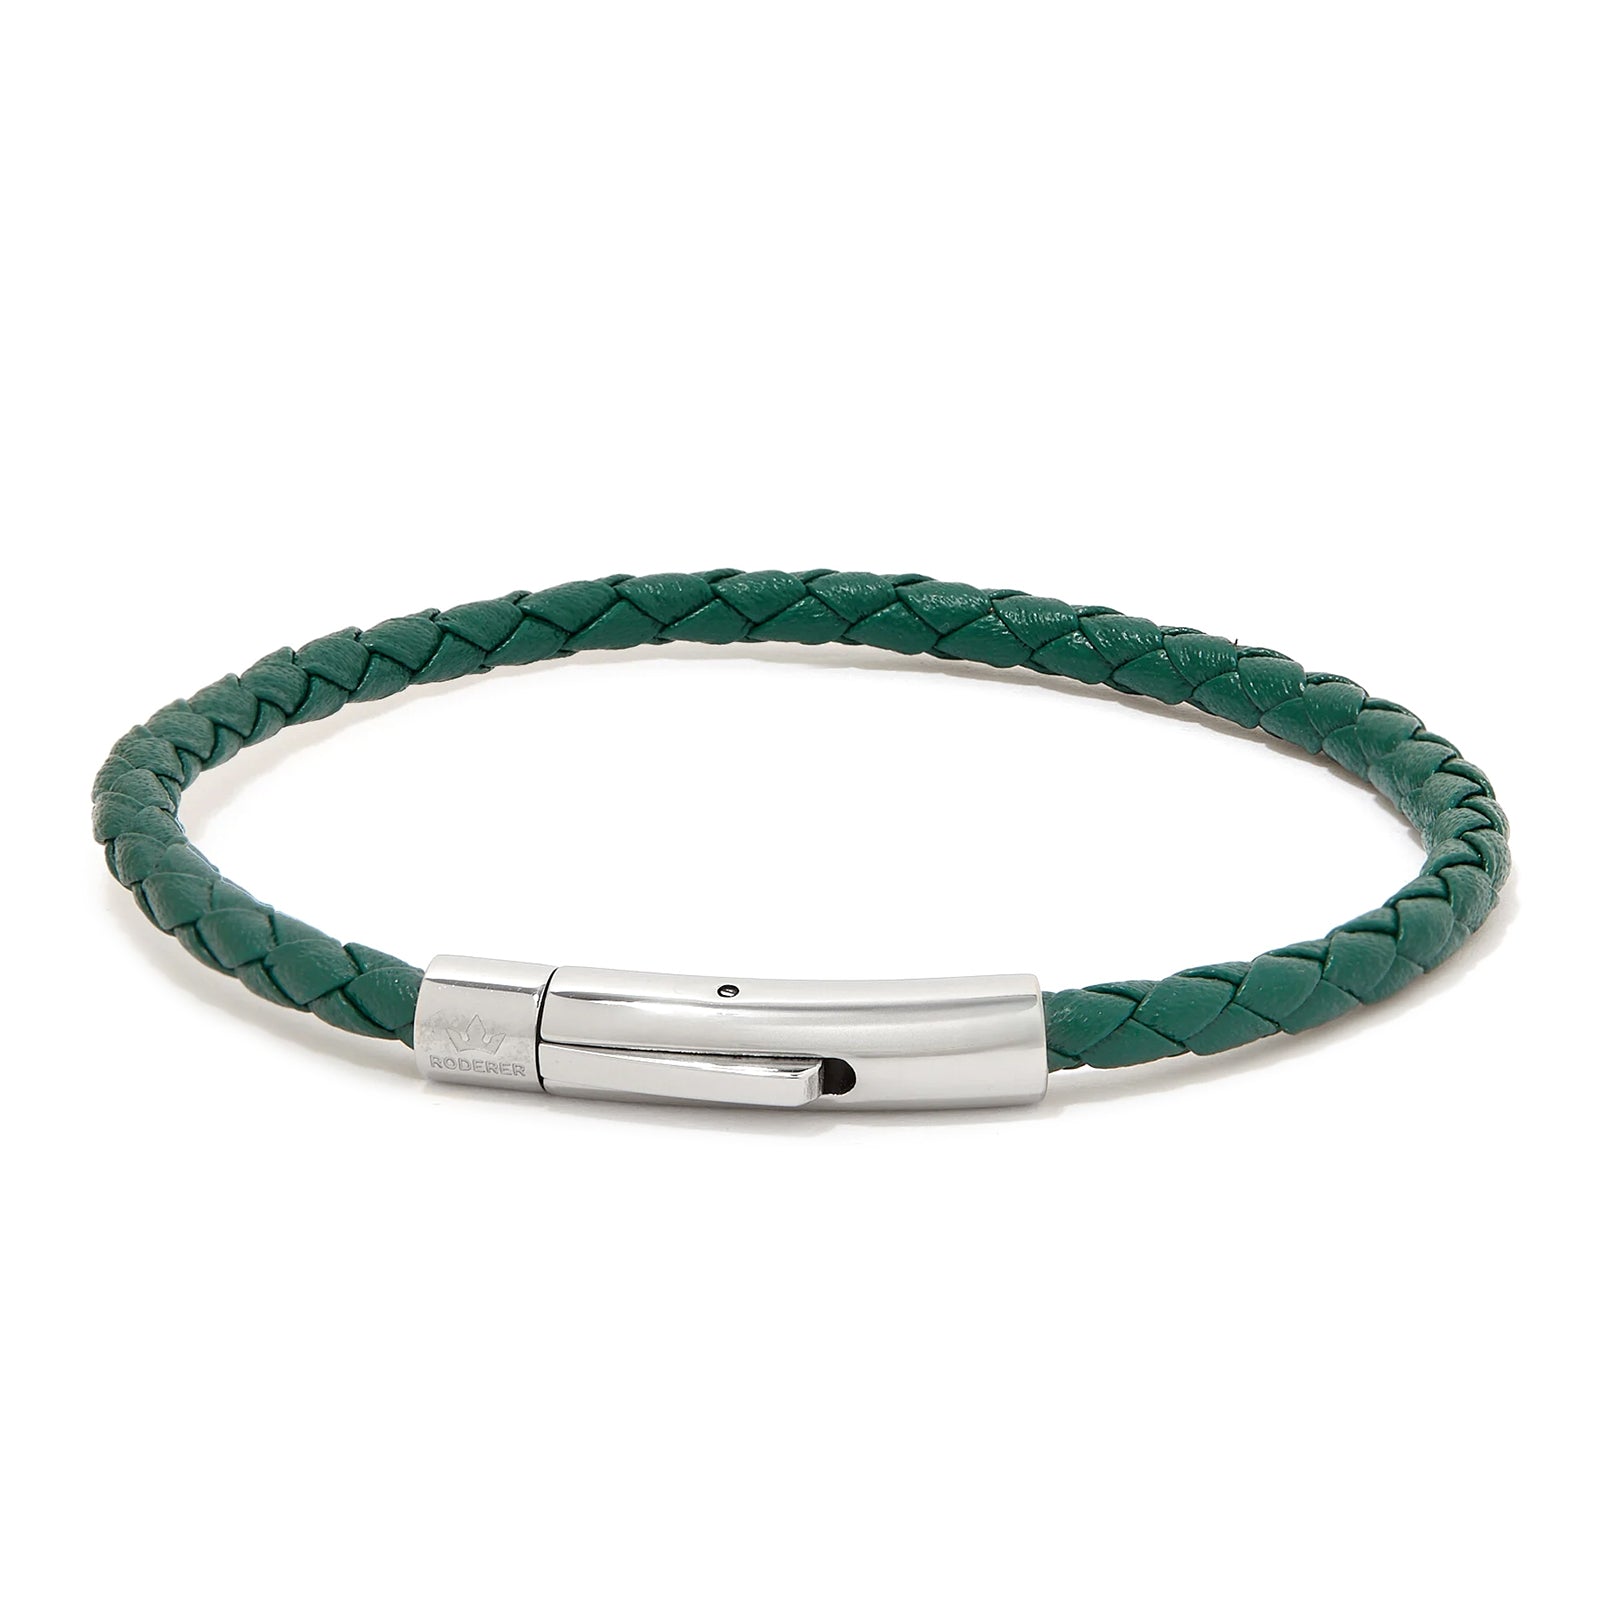 OUR ICONIC MATTEO BRACELET: NOW IN NEW EXCITING COLORS – RODERER